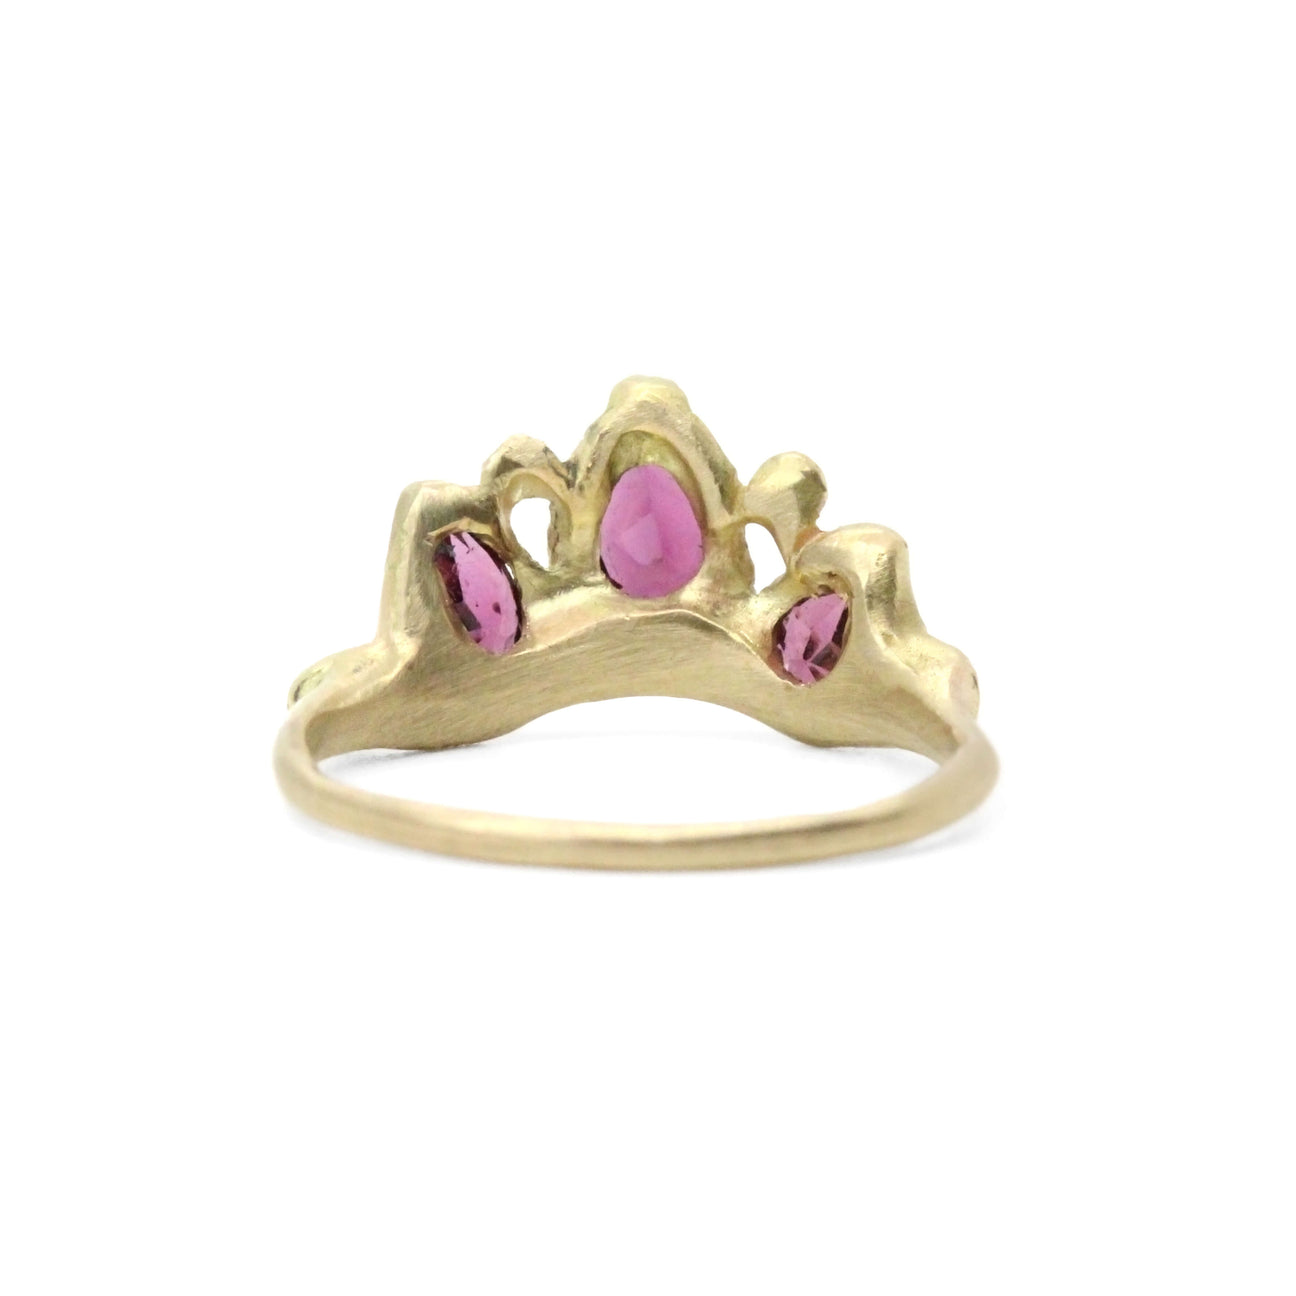 Load image into Gallery viewer, gold ring with 3 rasberry colored garnets, surrounded by smaller diamonds pictured from behind on white background
